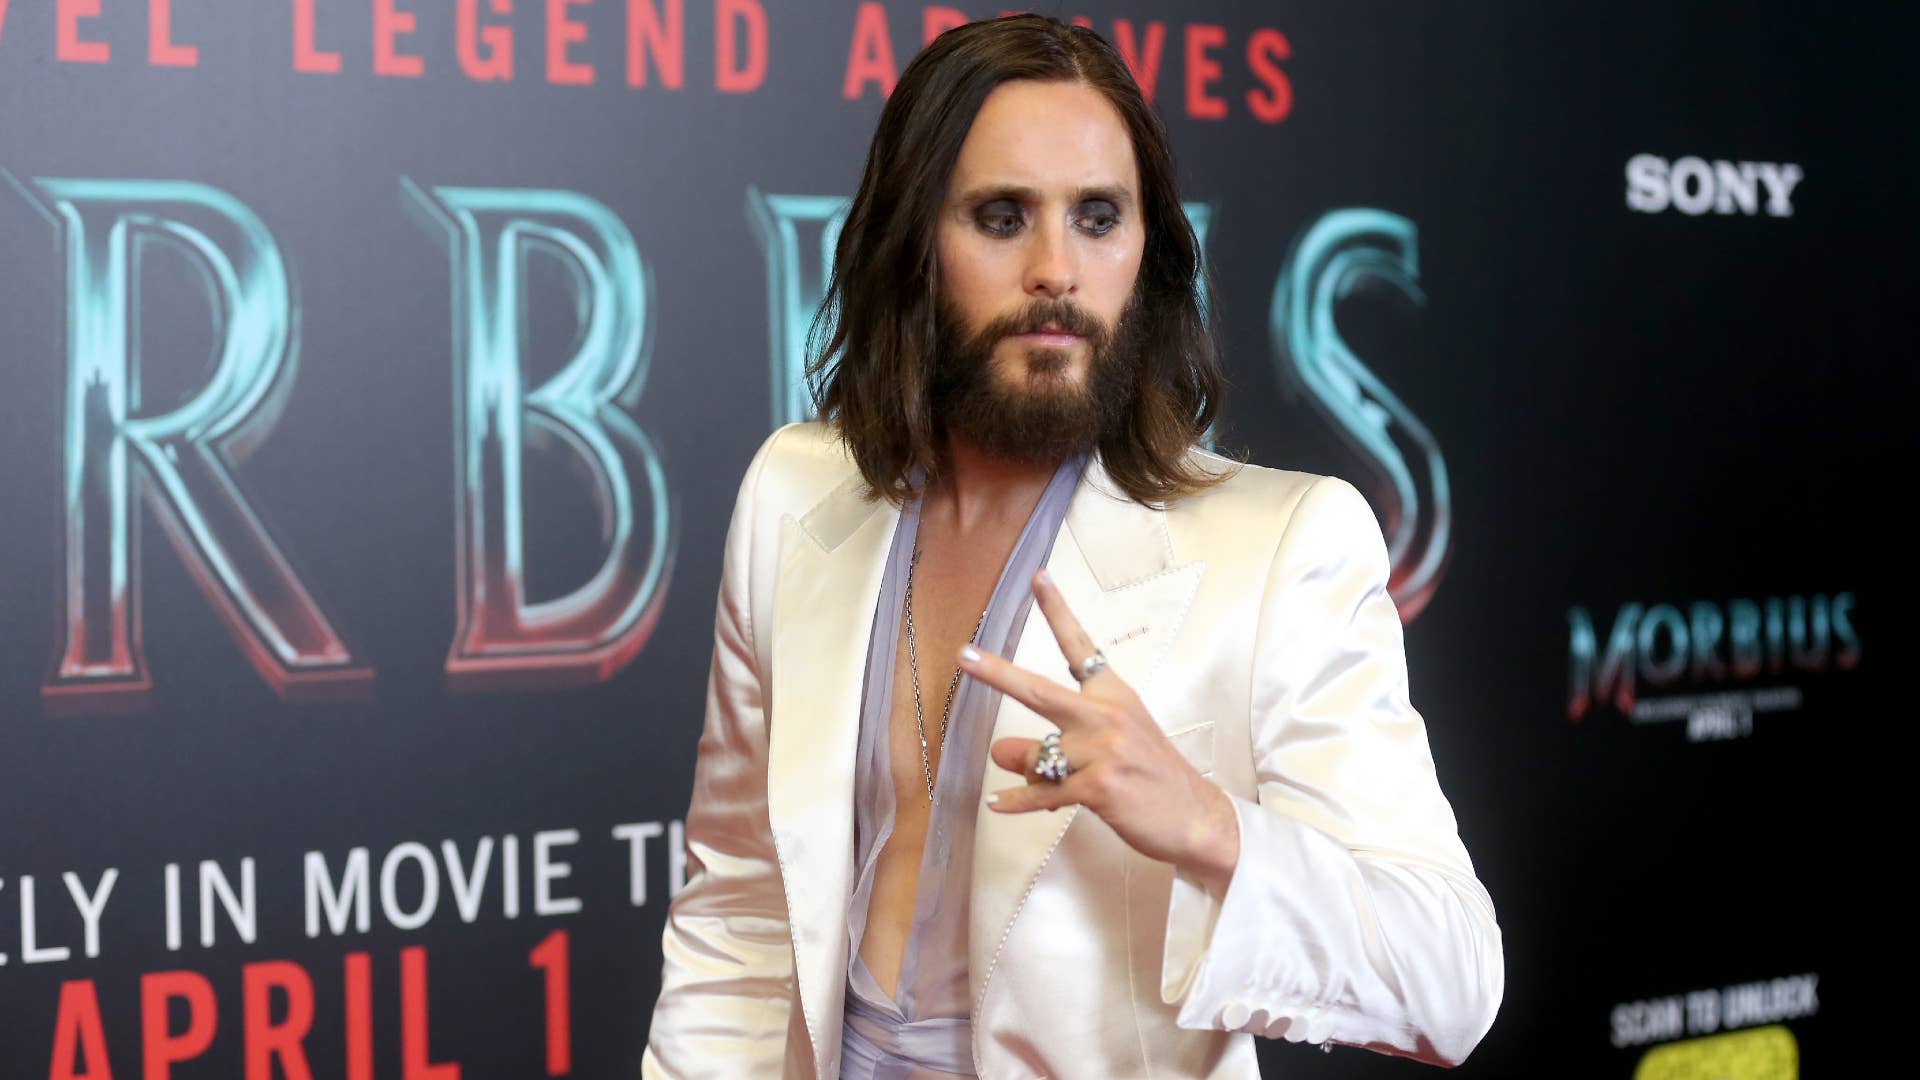 Jared Leto is seen at a red carpet event for a movie